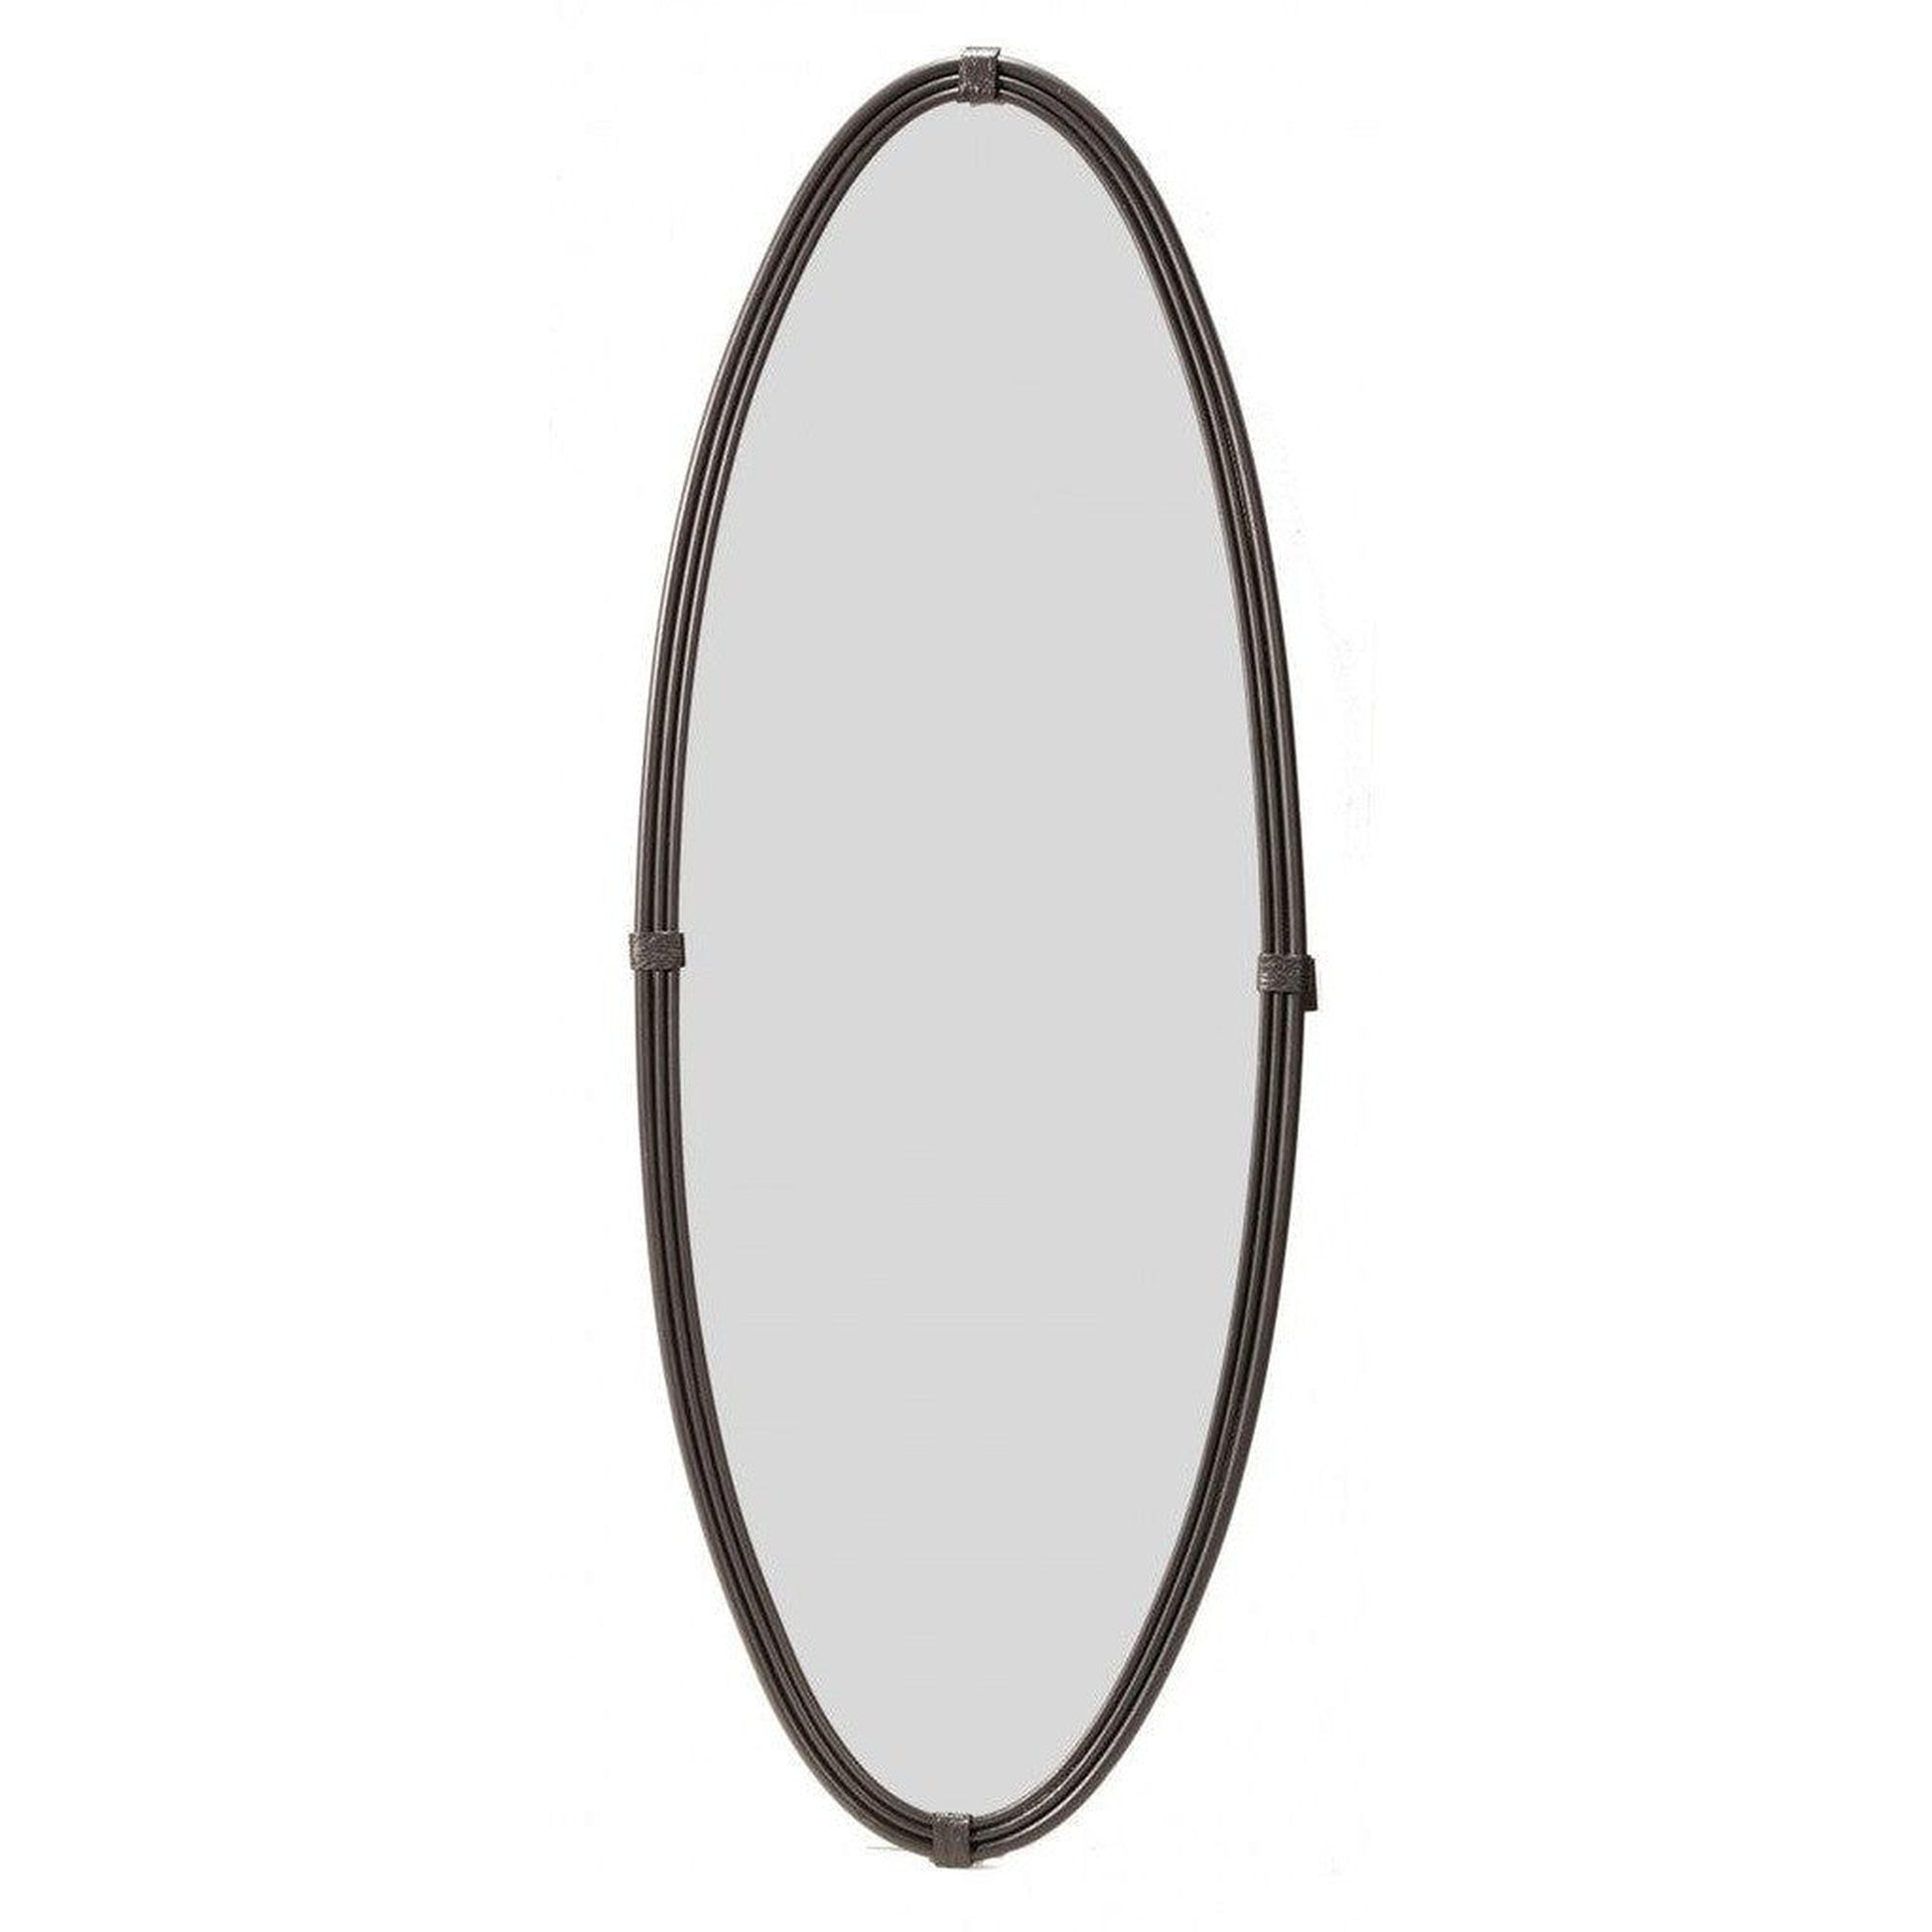 Stone County Ironworks Queensbury 25" Small Woodland Brown Oval Iron Wall Mirror